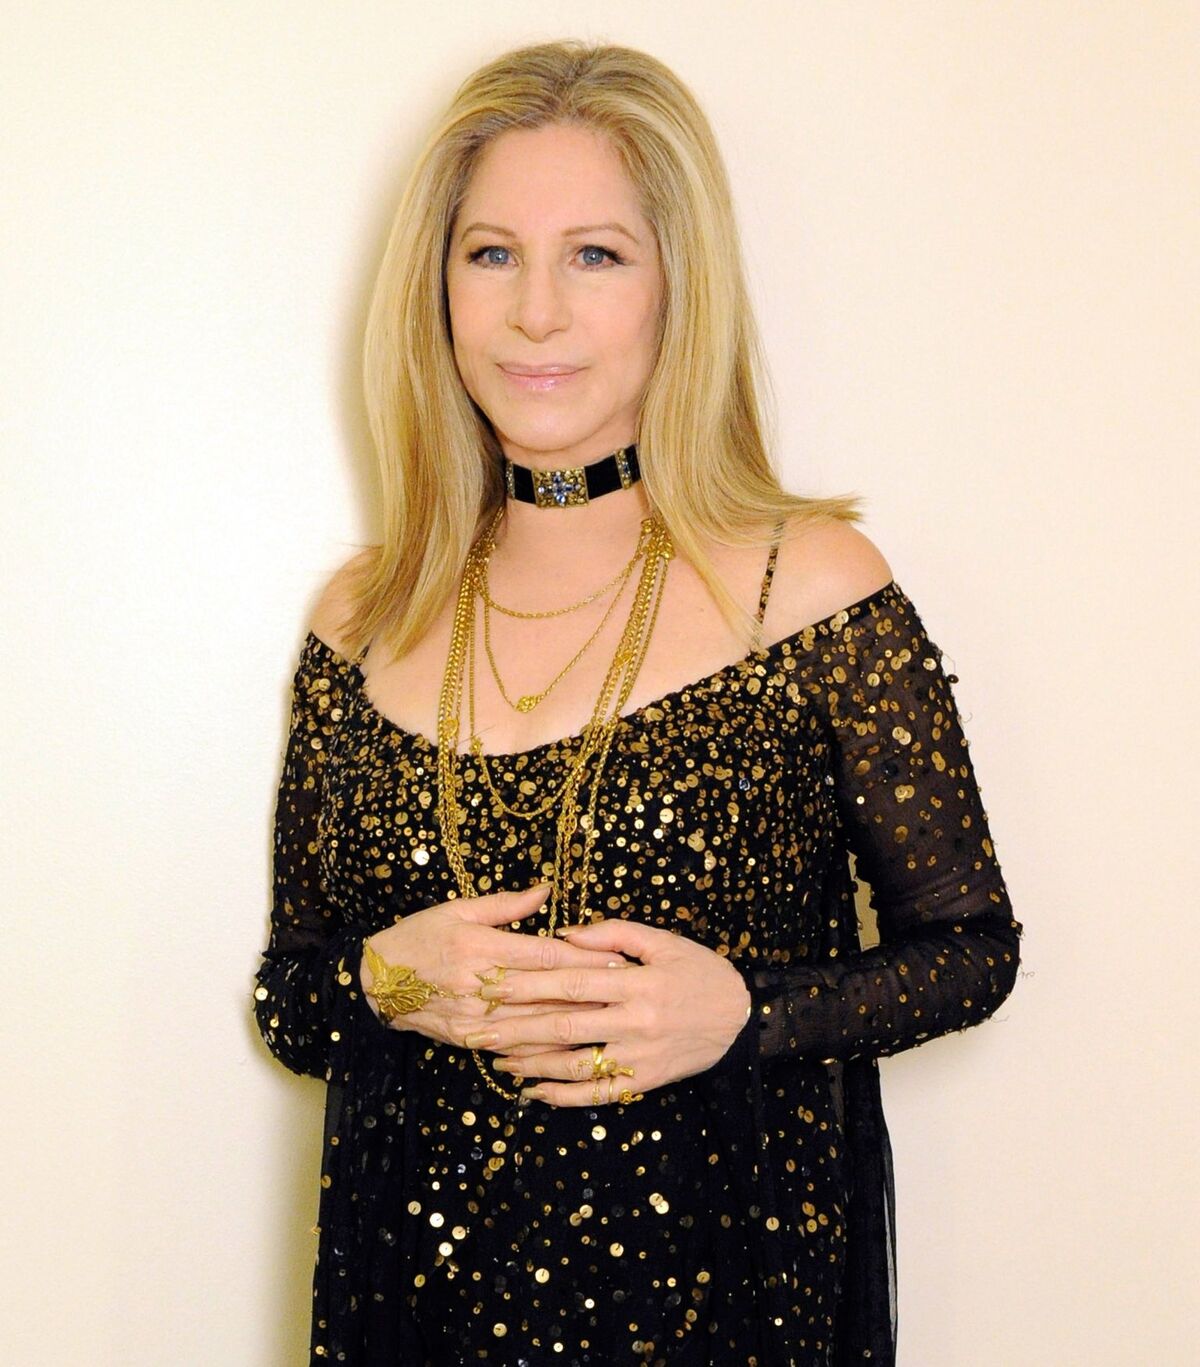 Barbra Streisand at the 85th Annual Academy Awards held at the Dolby Theatre on February 24, 2013, in Hollywood, California | Photo: Kevin Mazur/Getty Images